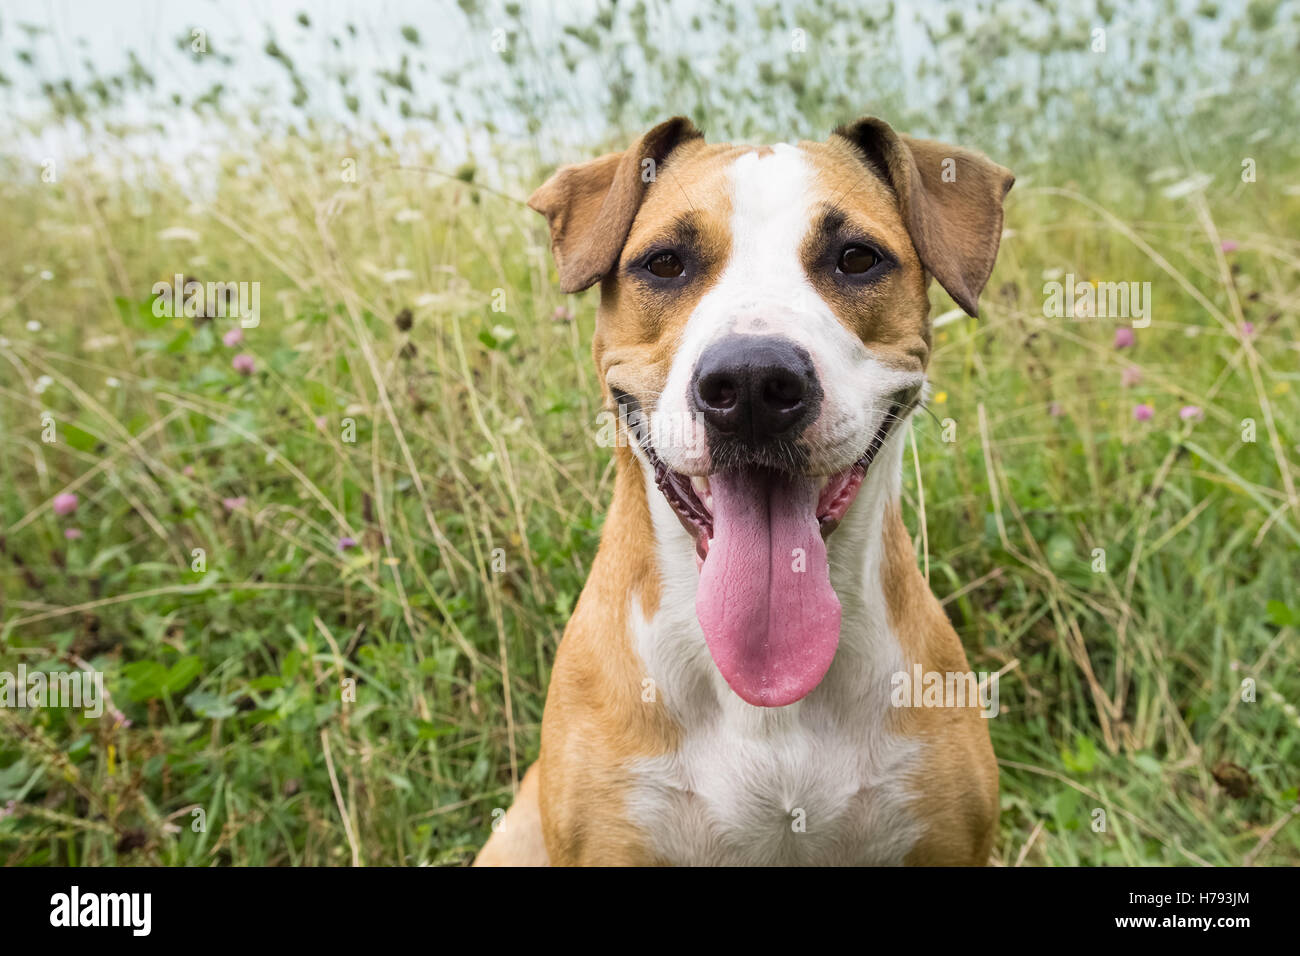 Smiling dog with big put out tongue sitting in the field among grasses and flowers on sunny day. Stock Photo